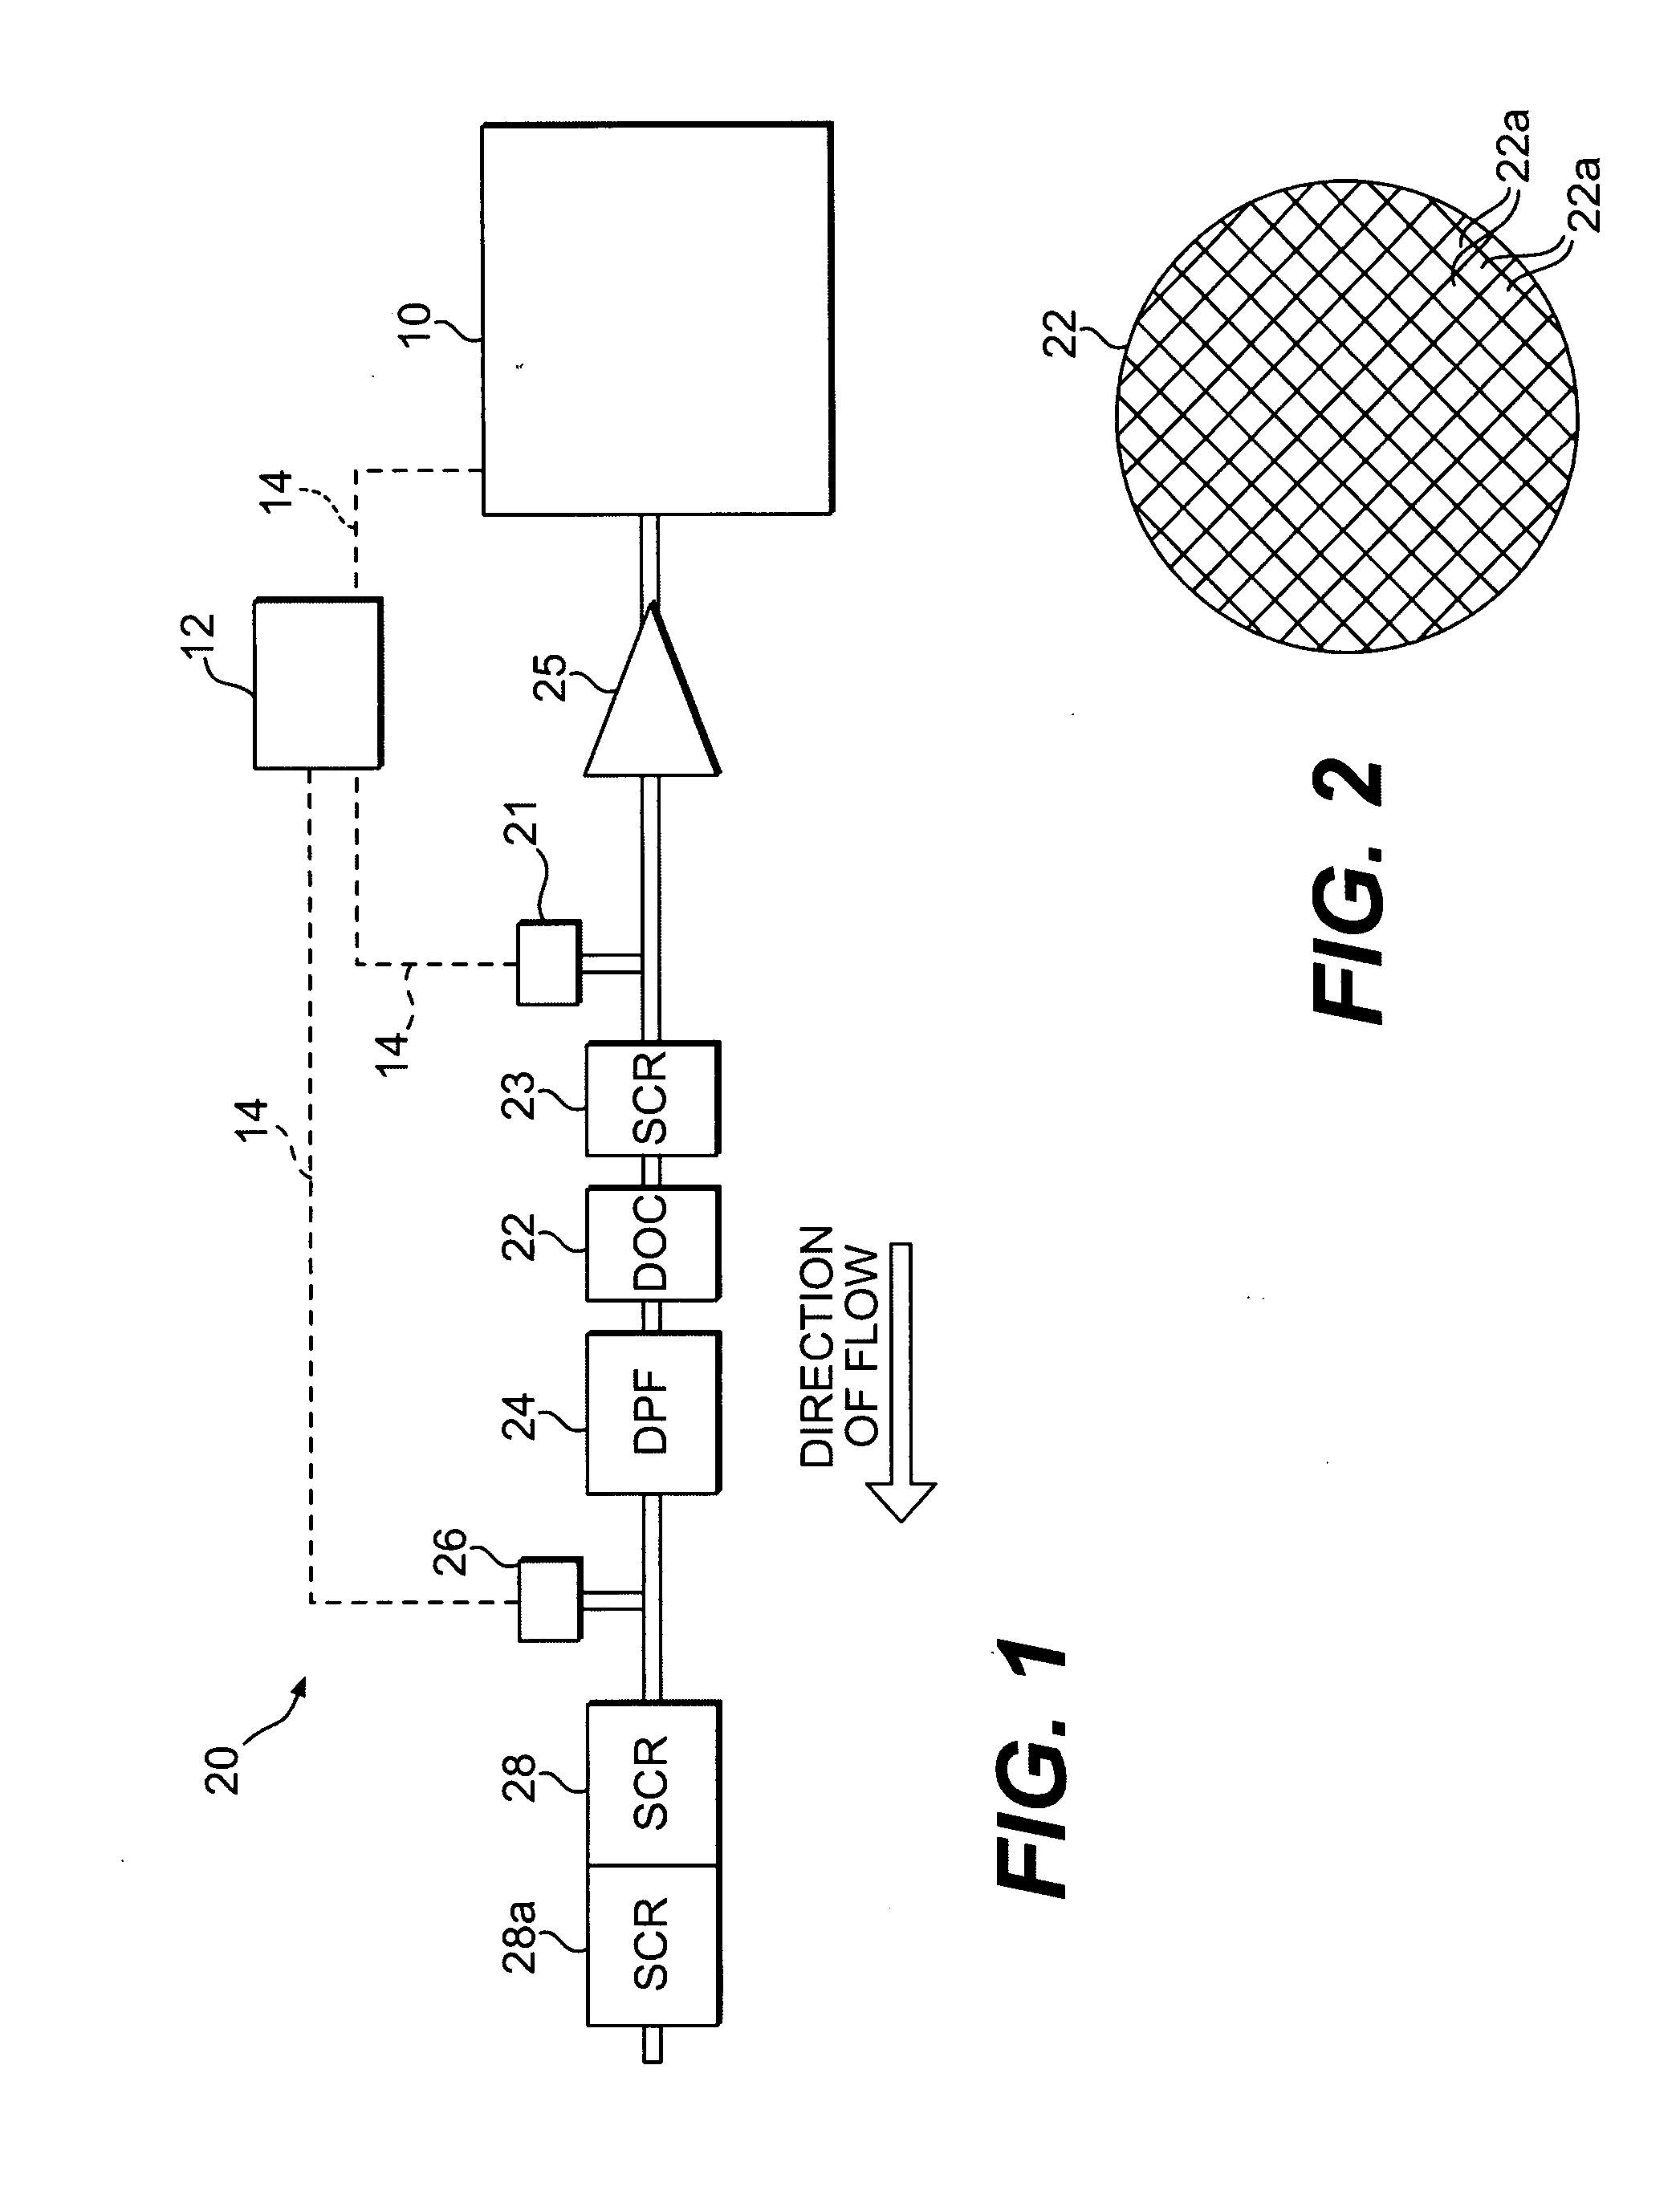 Exhaust treatment system with an oxidation device for NO2 control